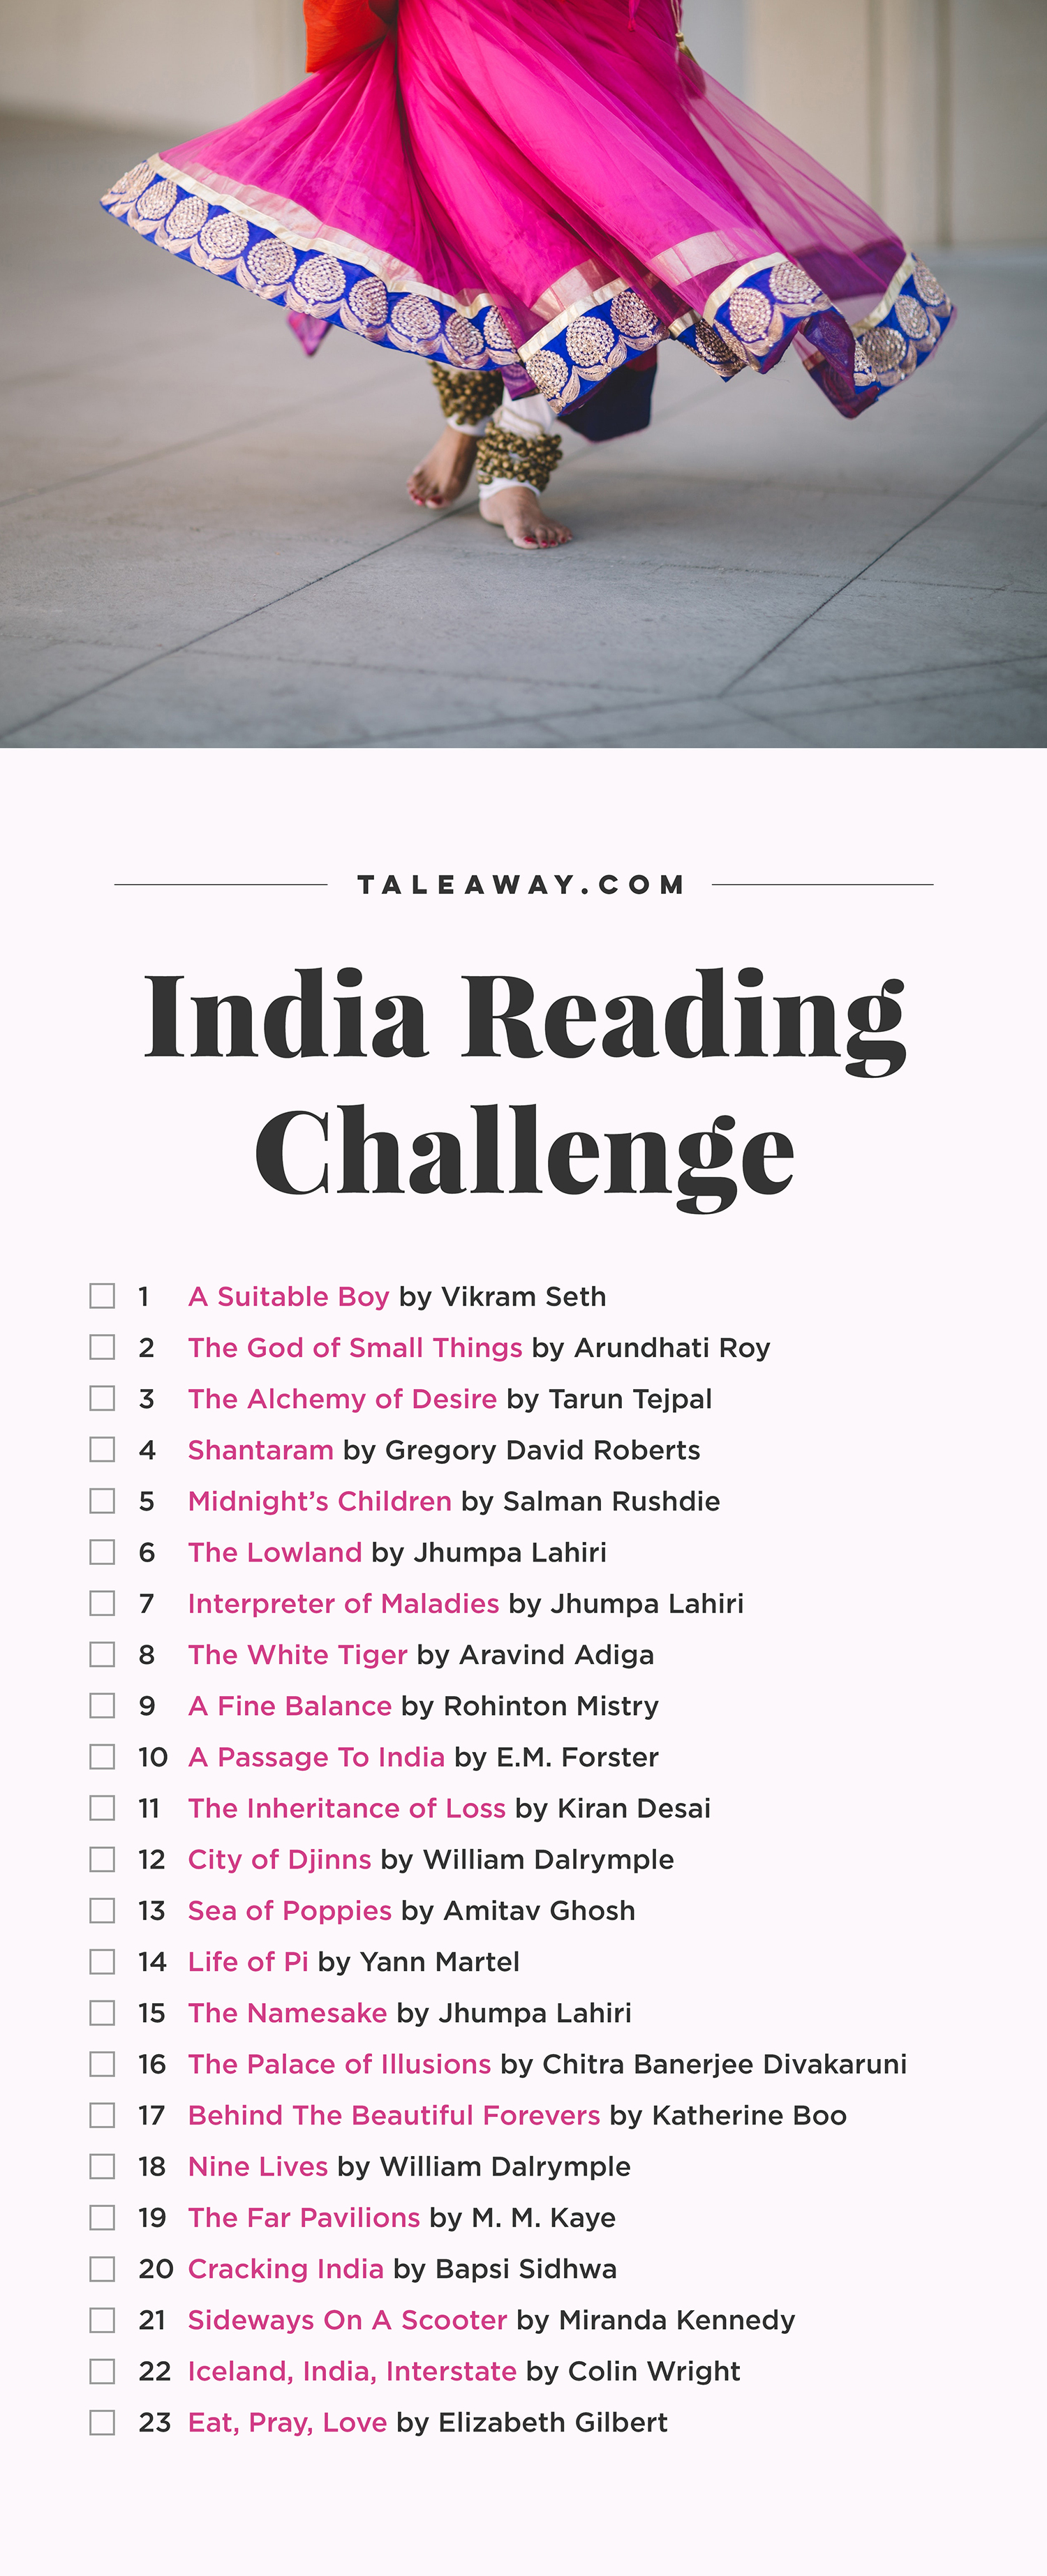 India Reading Challenge, Books Set In India - For more books visit www.taleway.com to find books set around the world. Ideas for those who like to travel, both in life and in fiction. reading challenge, india reading challenge, book challenge, books you must read, books from around the world, world books, books and travel, travel reading list, reading list, books around the world, books to read, india books, india books novels, india travel